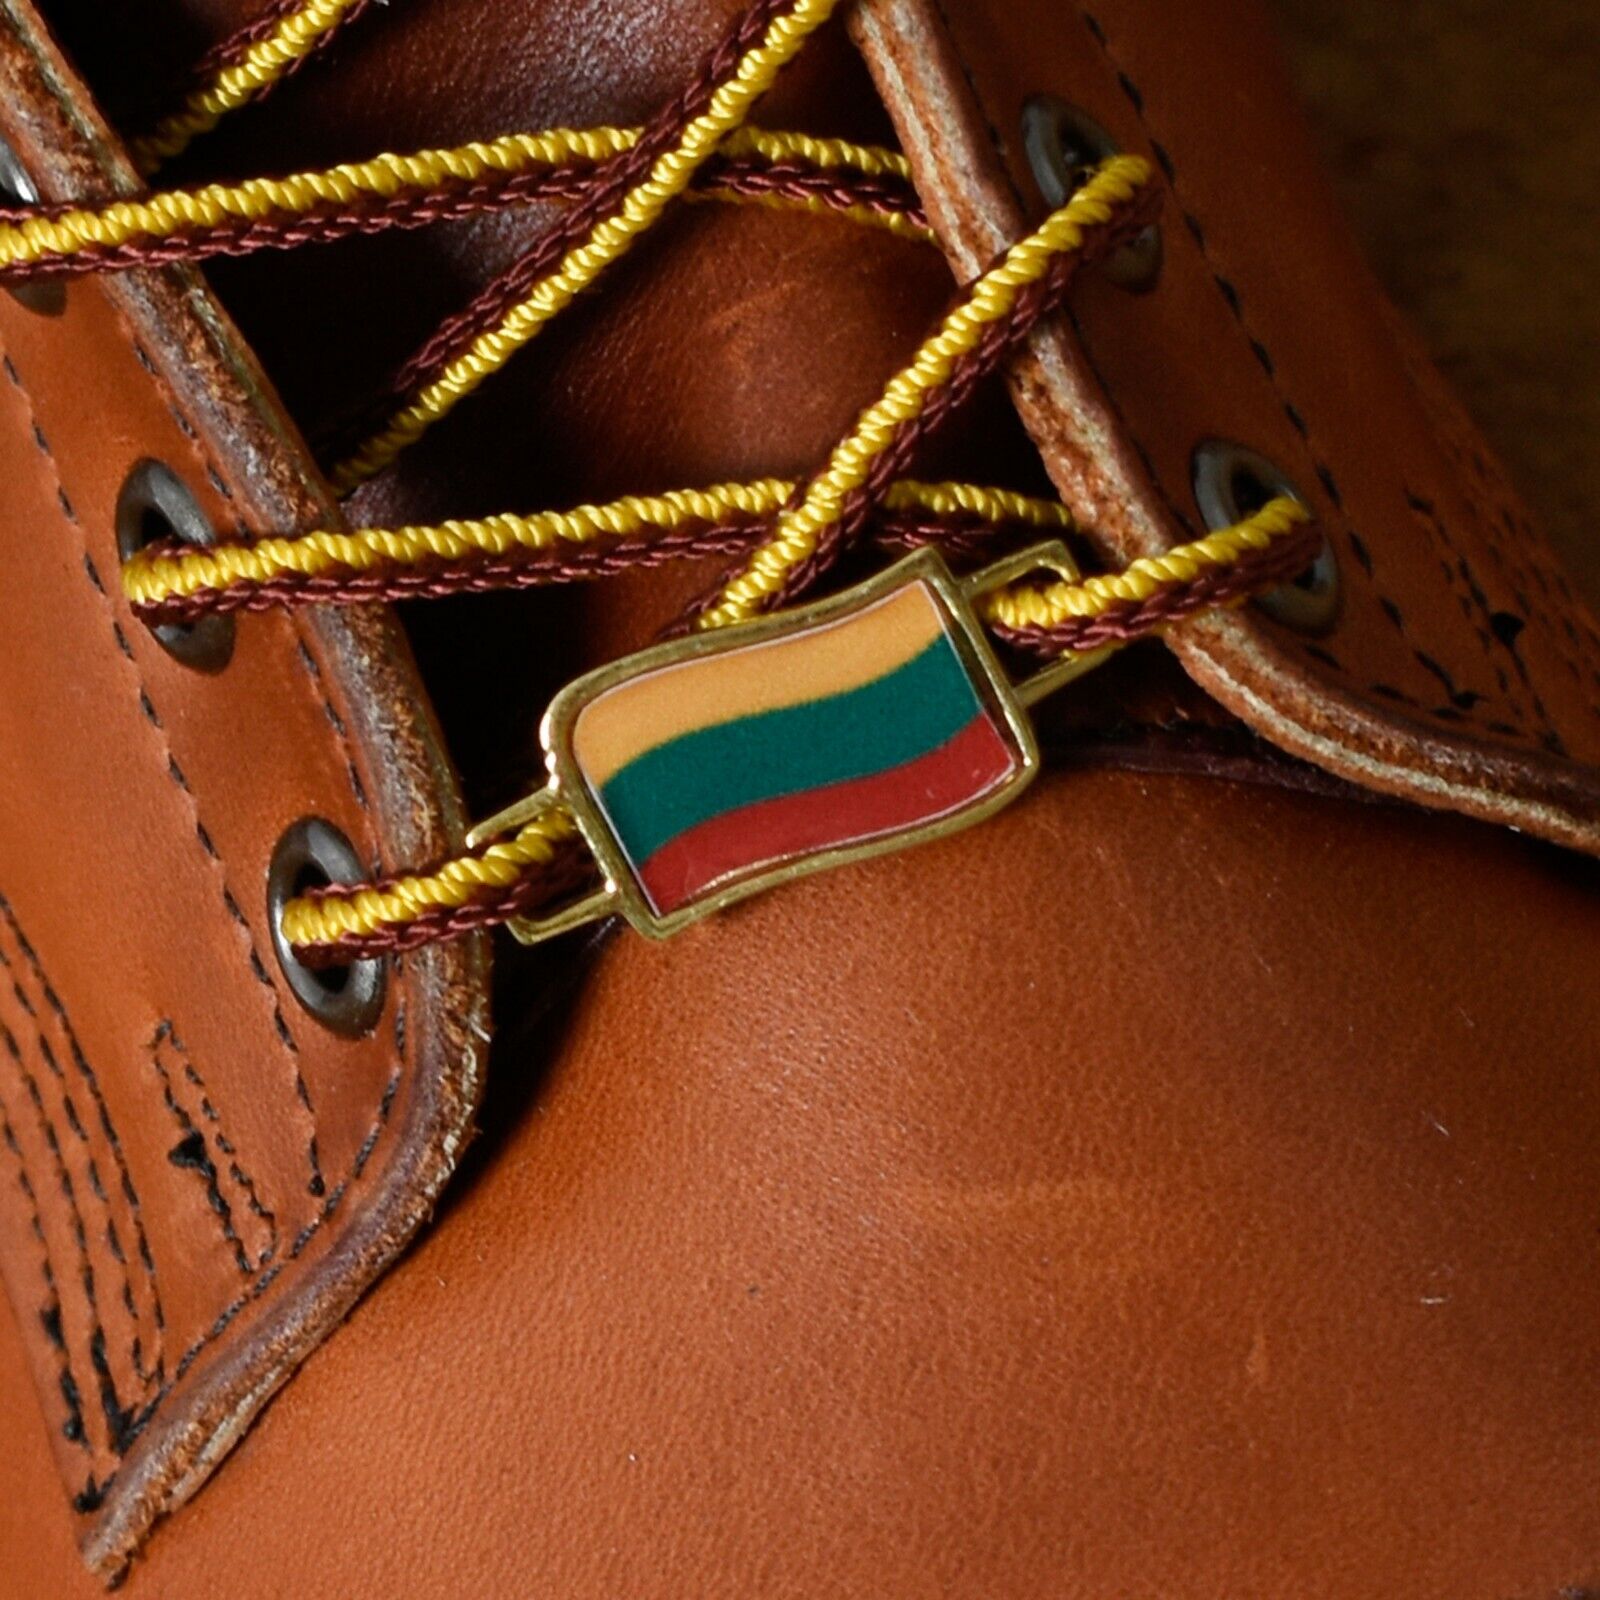 Lithuania Flags Shoes Boot Shoelace Keeper Holder Charm BrooklynMaker